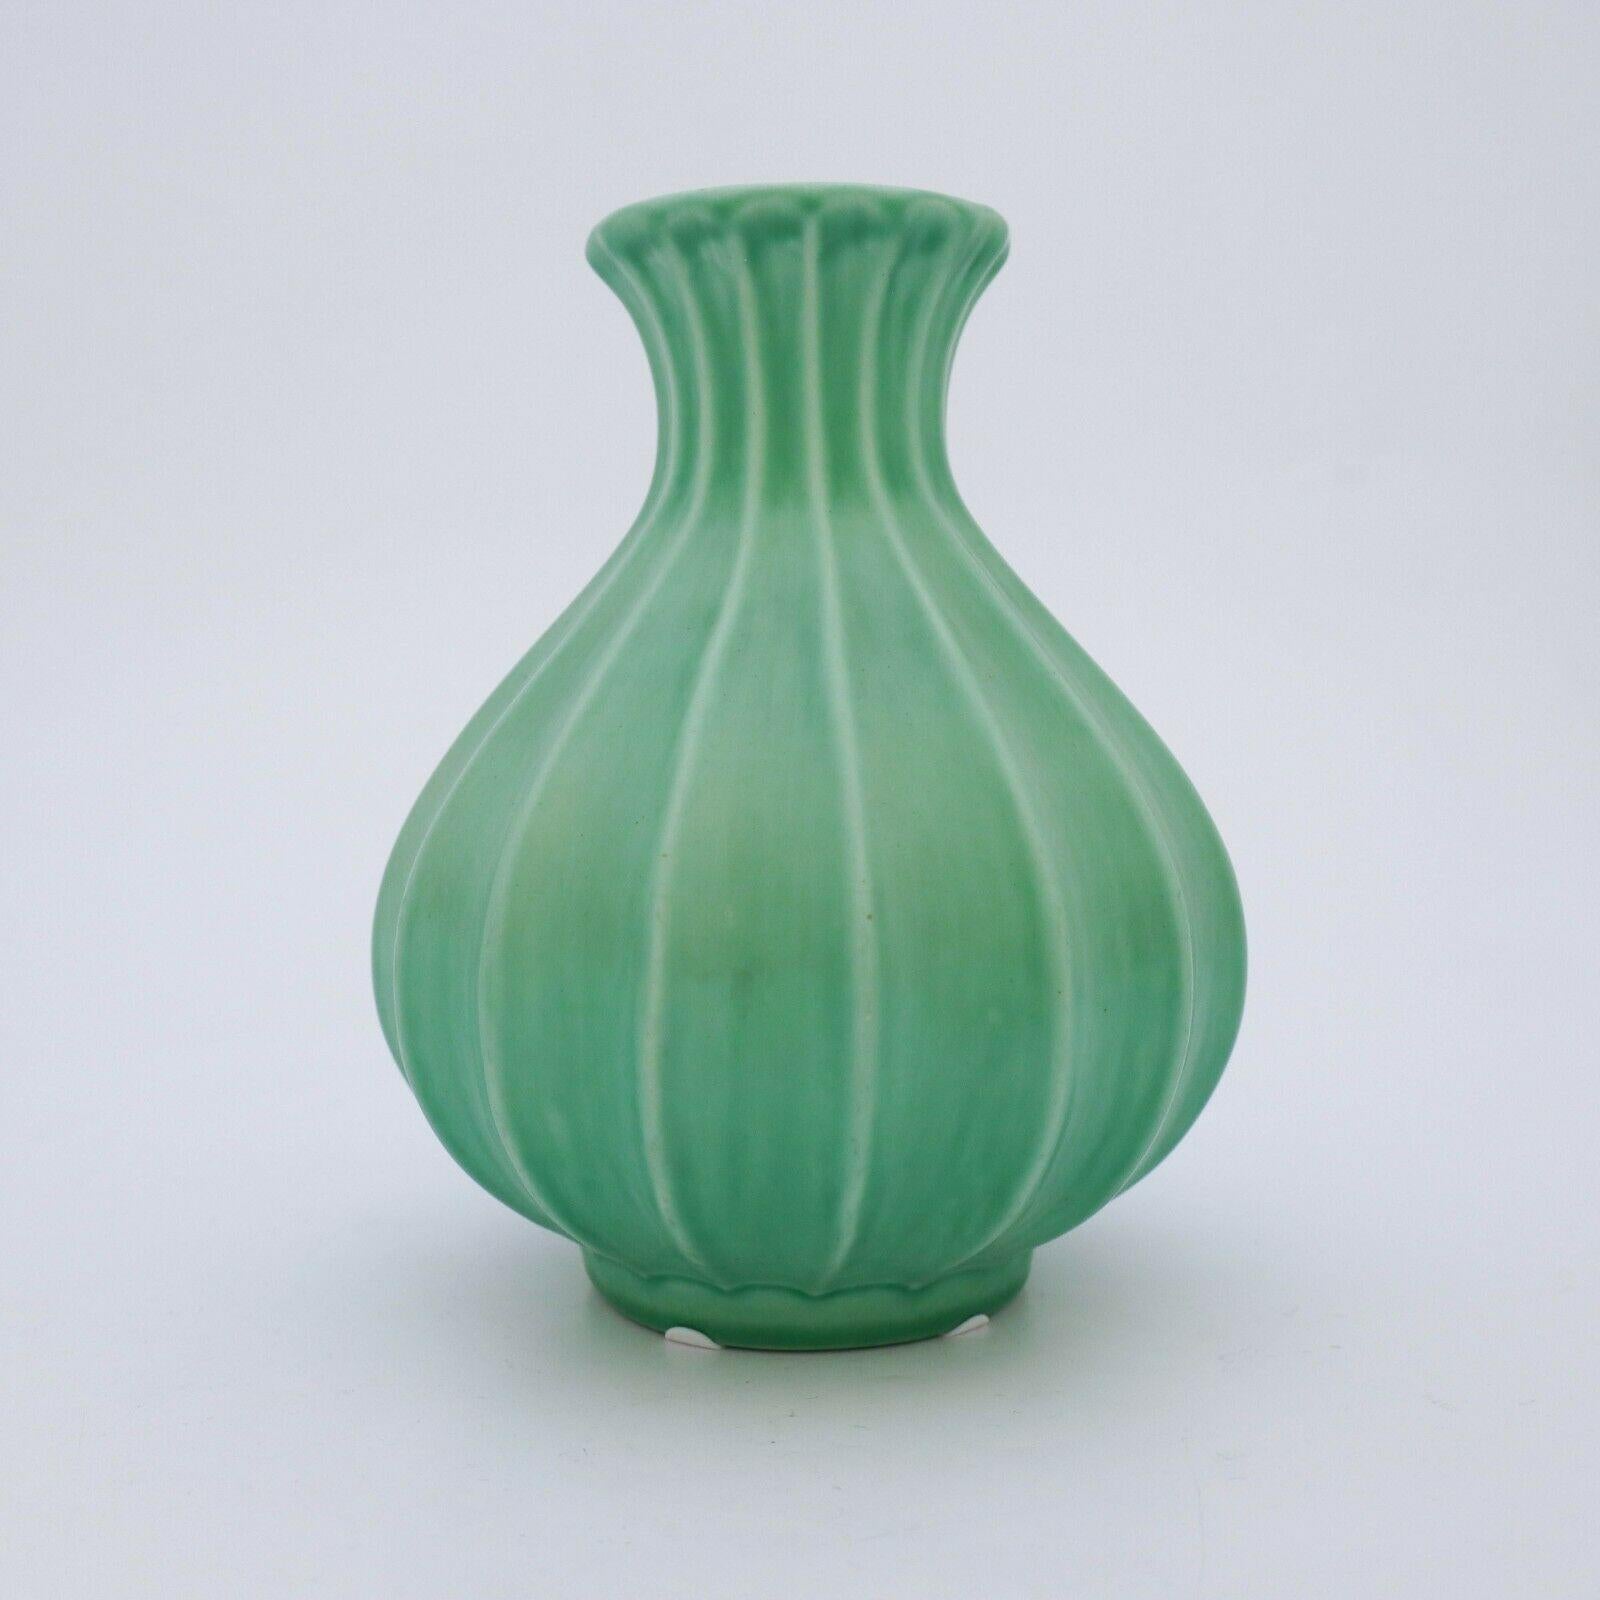 A beautiful green vase designed by Ewald Dahlskog at Bo Fajans in Gefle in the 1930s. The vase is 18.5 cm high. And it is in very good condition.